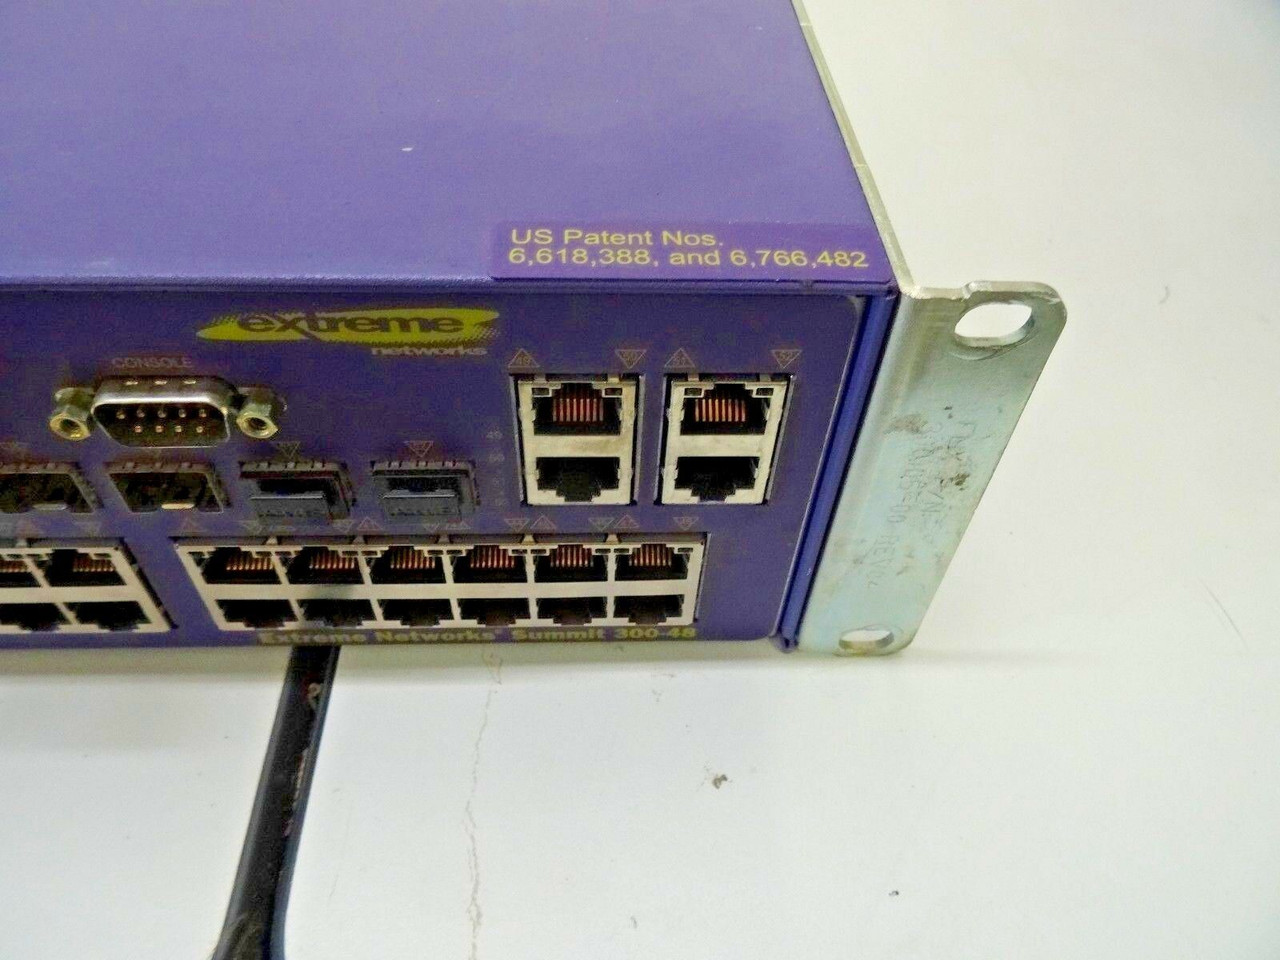 Extreme Networks Summit 300-48 10/100 Ethernet Switch 15402